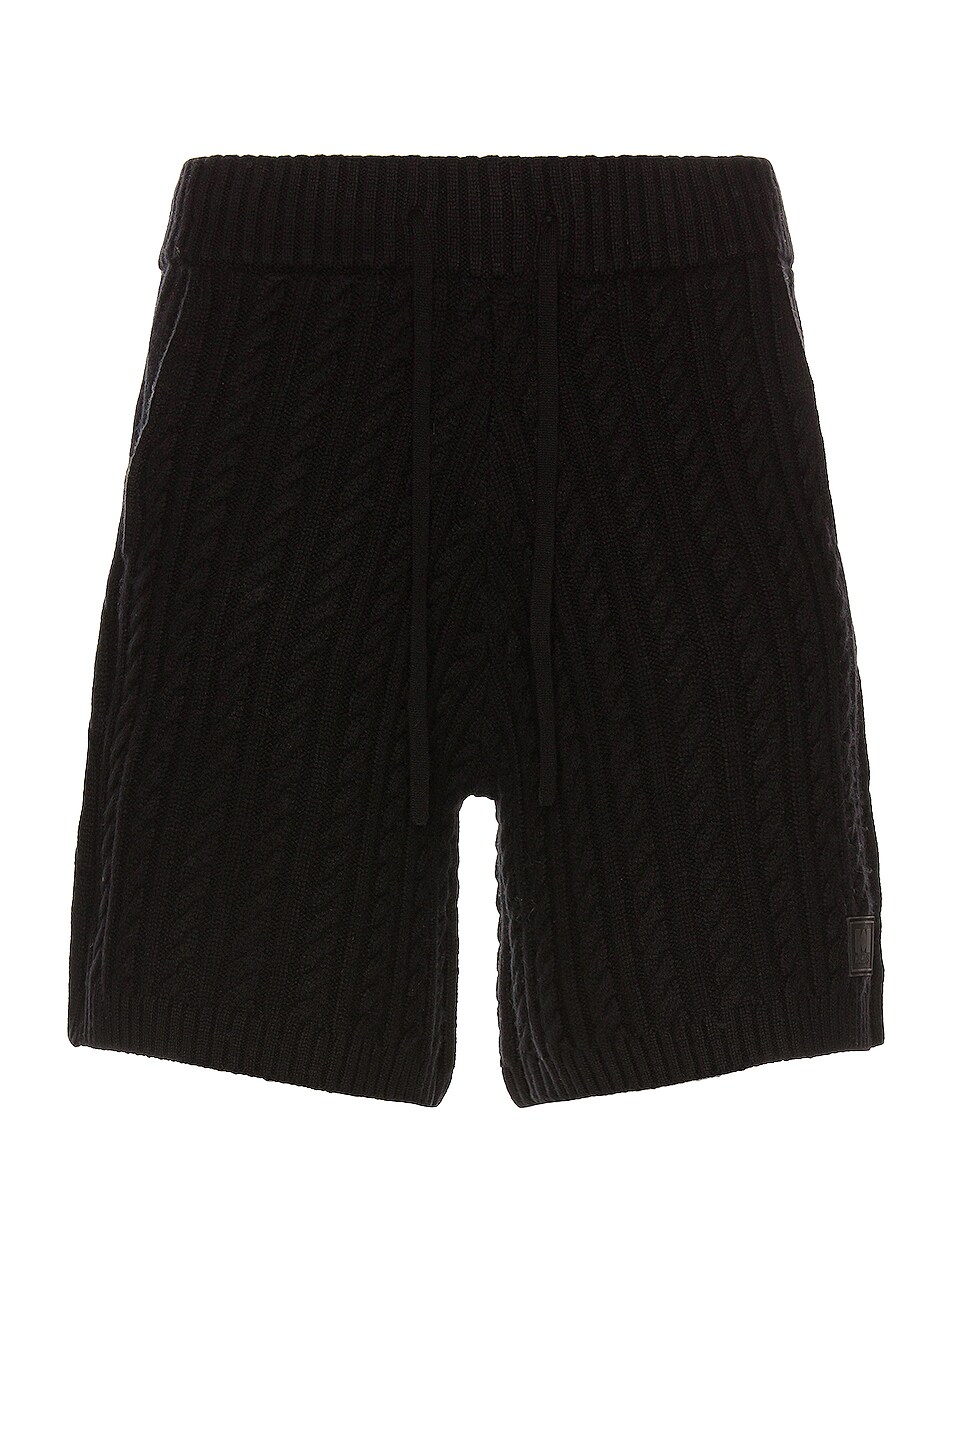 Image 1 of Nahmias Full Cable Knit Basketball Shorts in Black